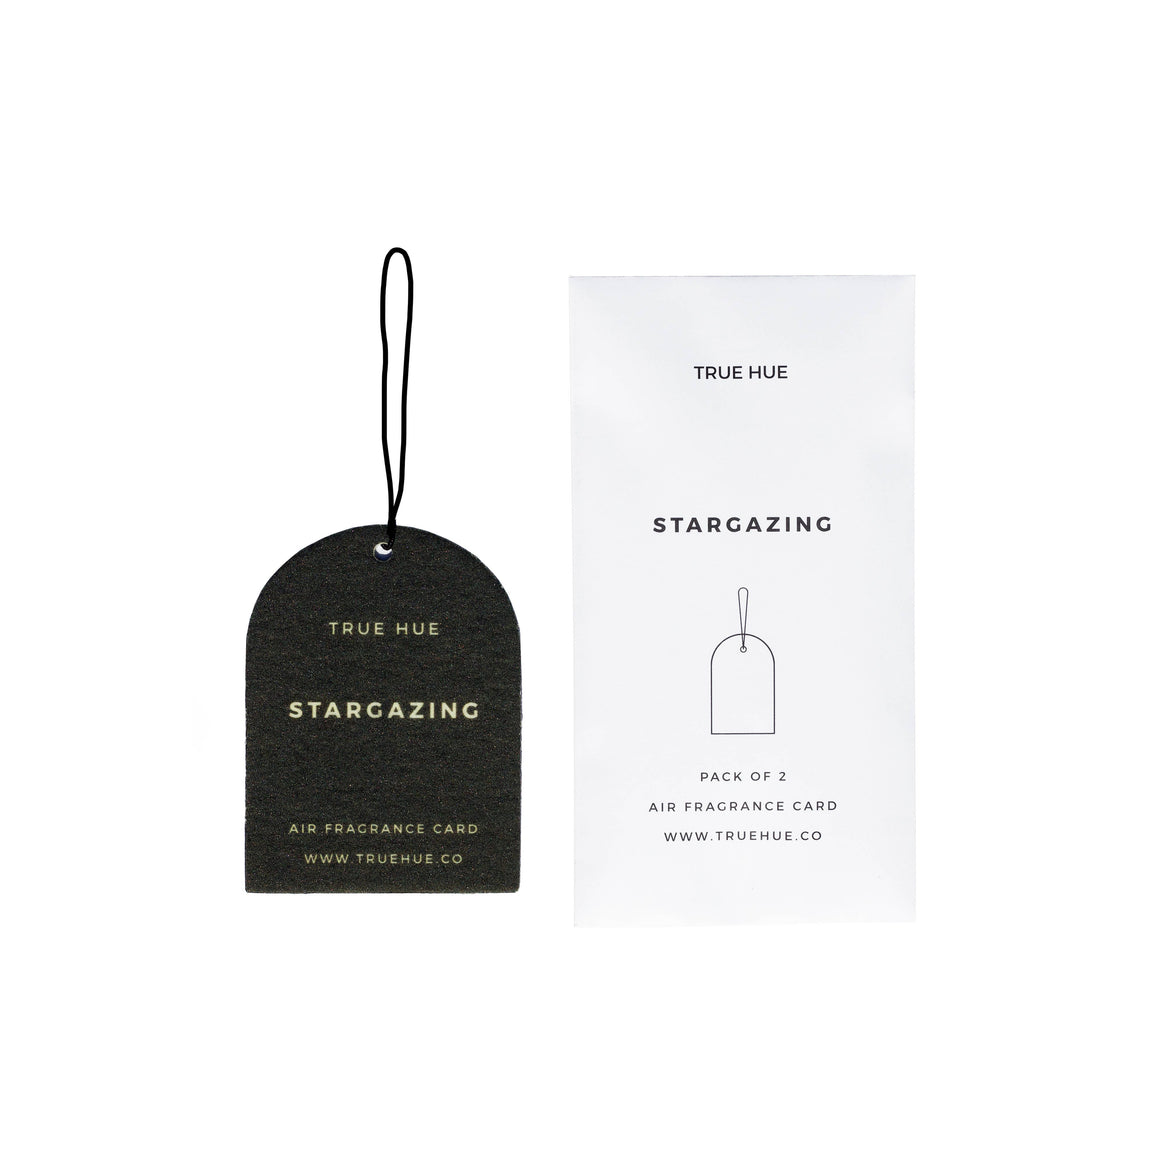 Stargazing Air Fragrance Card, Pack of 2 - Northern Print Co.